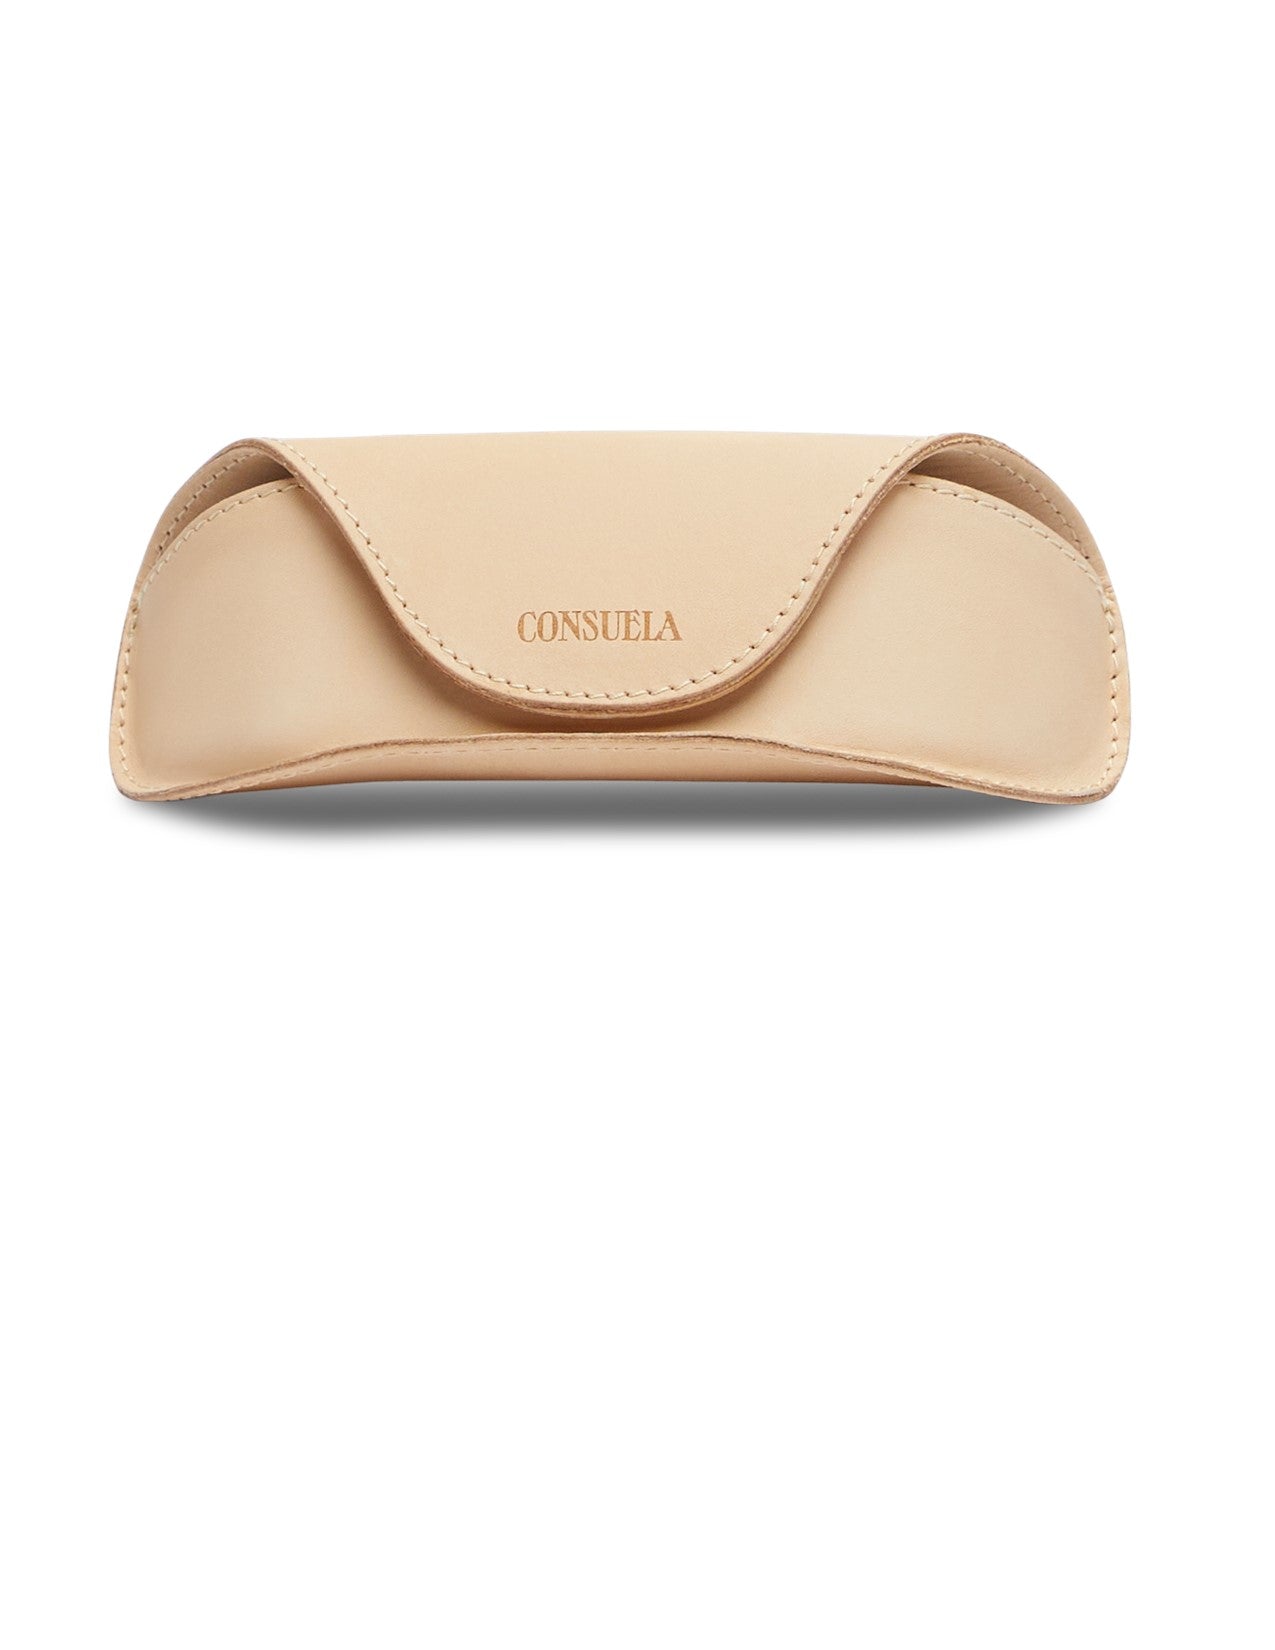 Consuela Sunglass Case - Diego-Consuela Bags-Consuela-Market Street Nest, Fashionable Clothing, Shoes and Home Décor Located in Mabank, TX